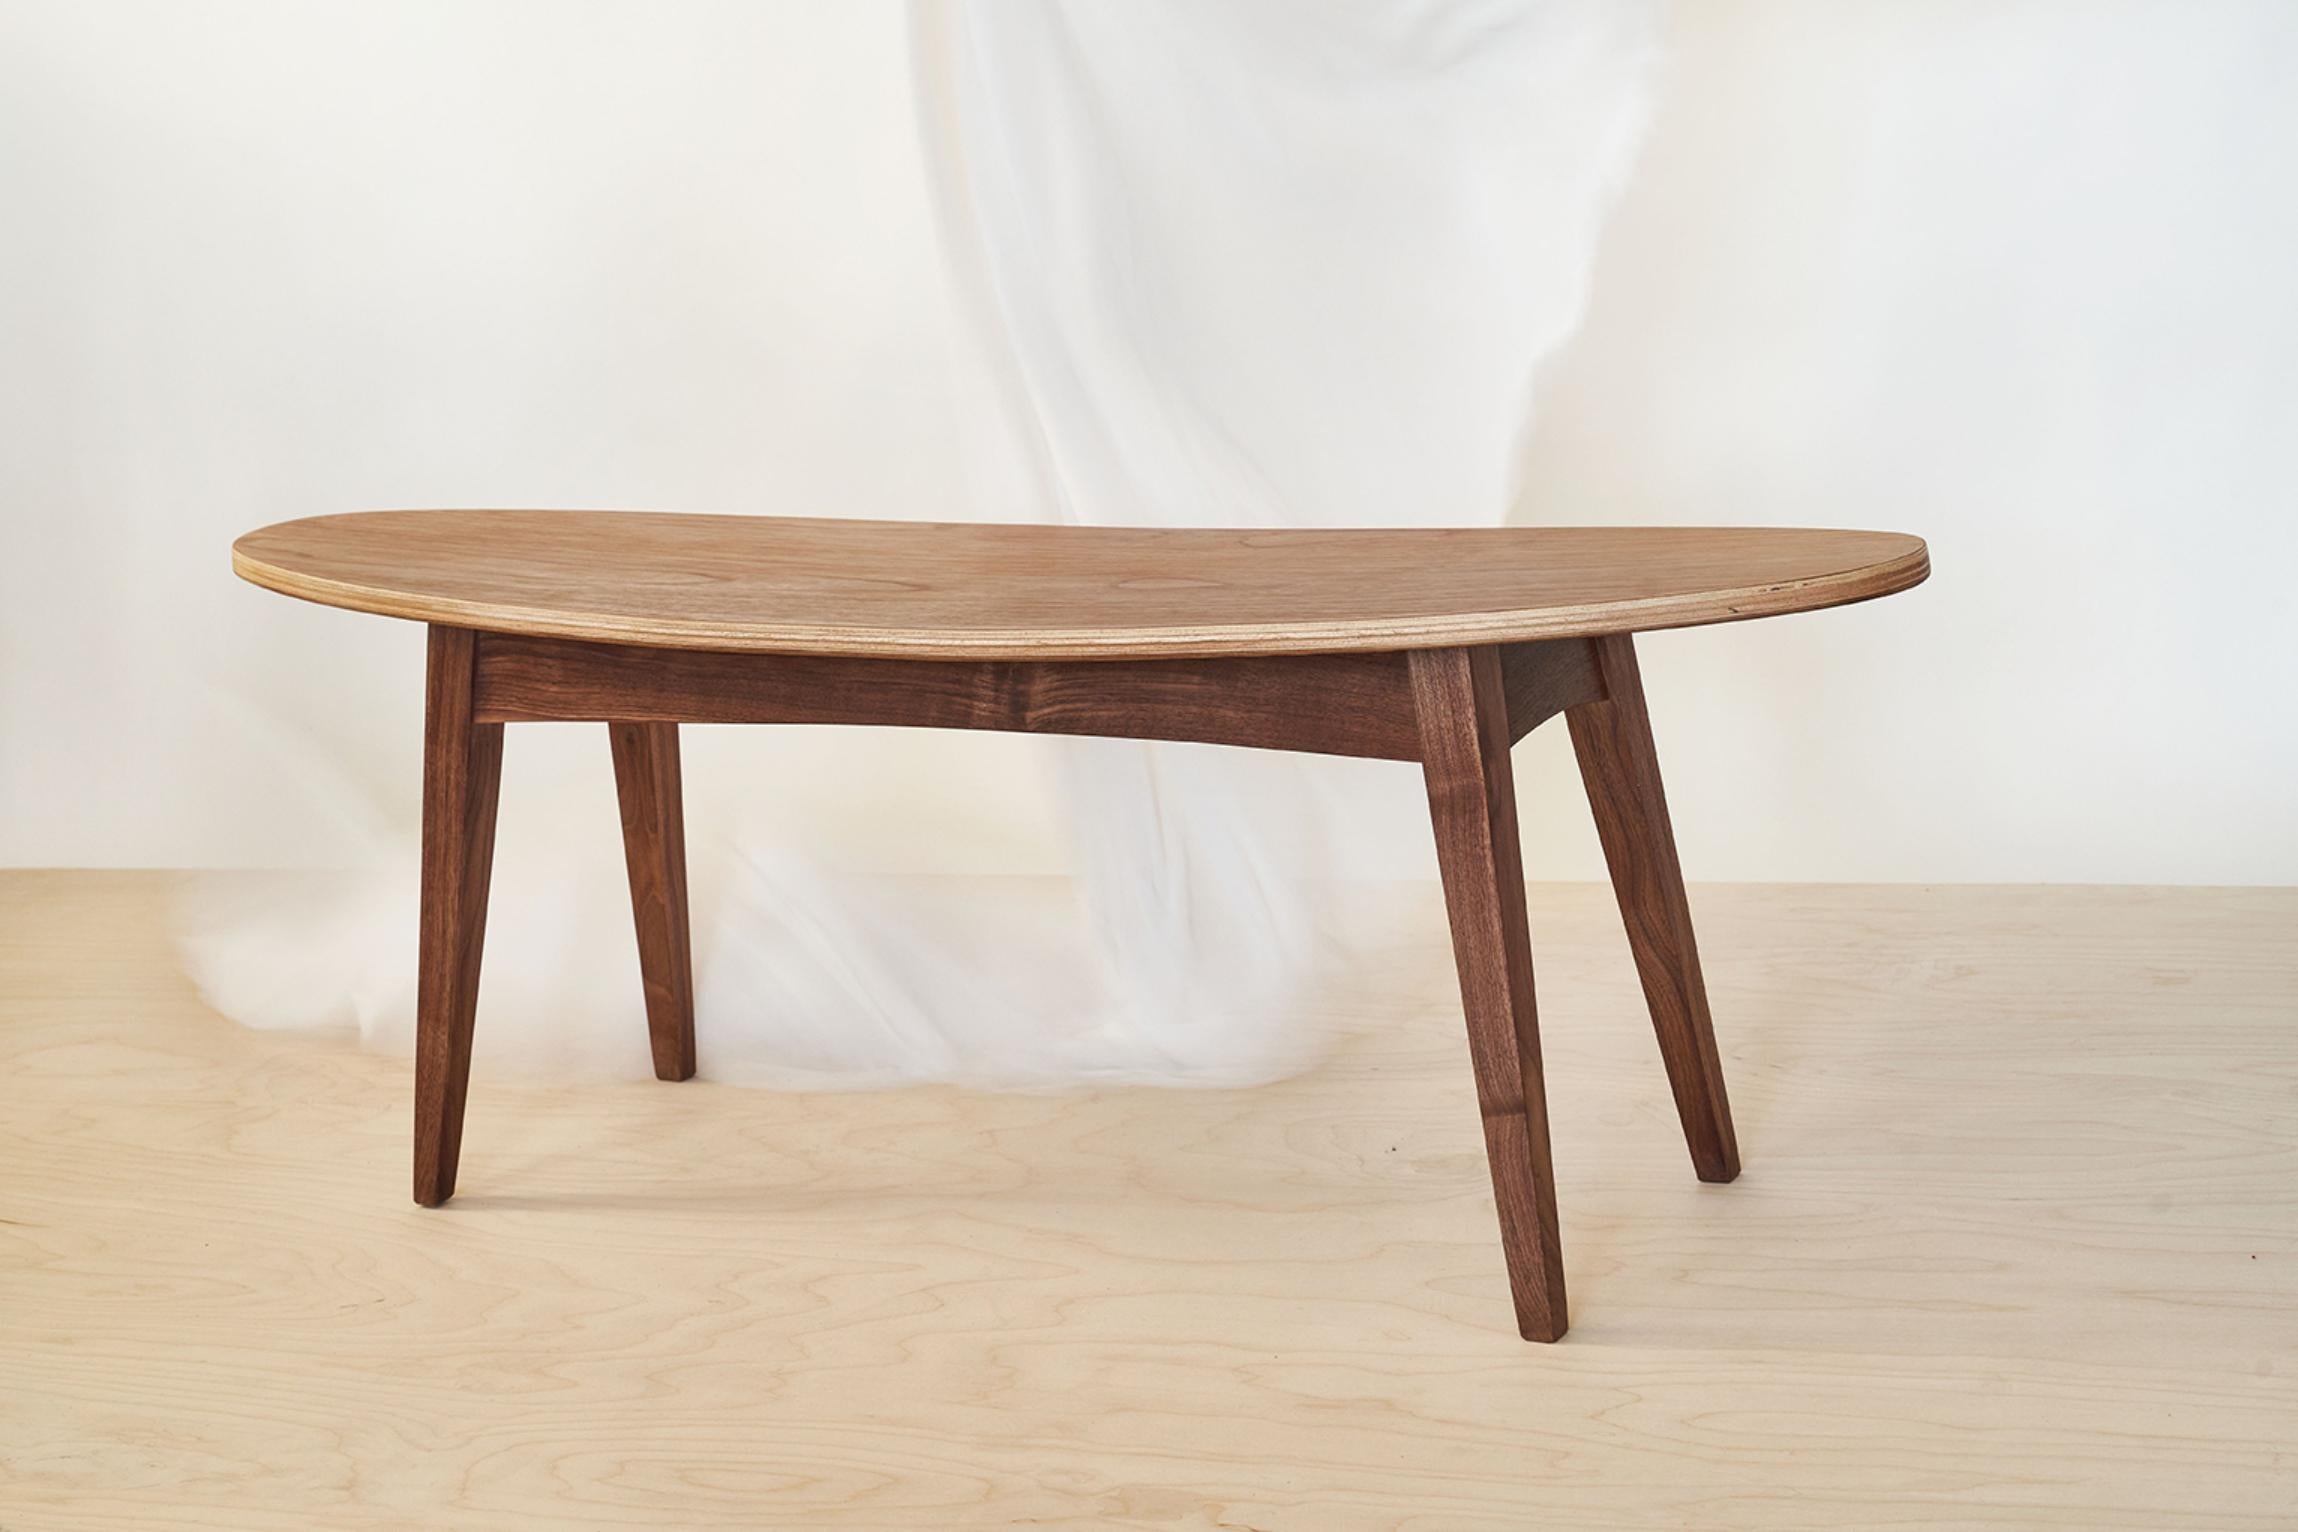 SURF Walnut Bench by Jean-Baptiste Van den Heede
Dimensions: L 118 x D 34 x H 43 cm
Materials: Walnut.

The wooden SURF version proposes a stool with different woods to your liking.

Jean-Baptiste Van den Heede defines himself as a